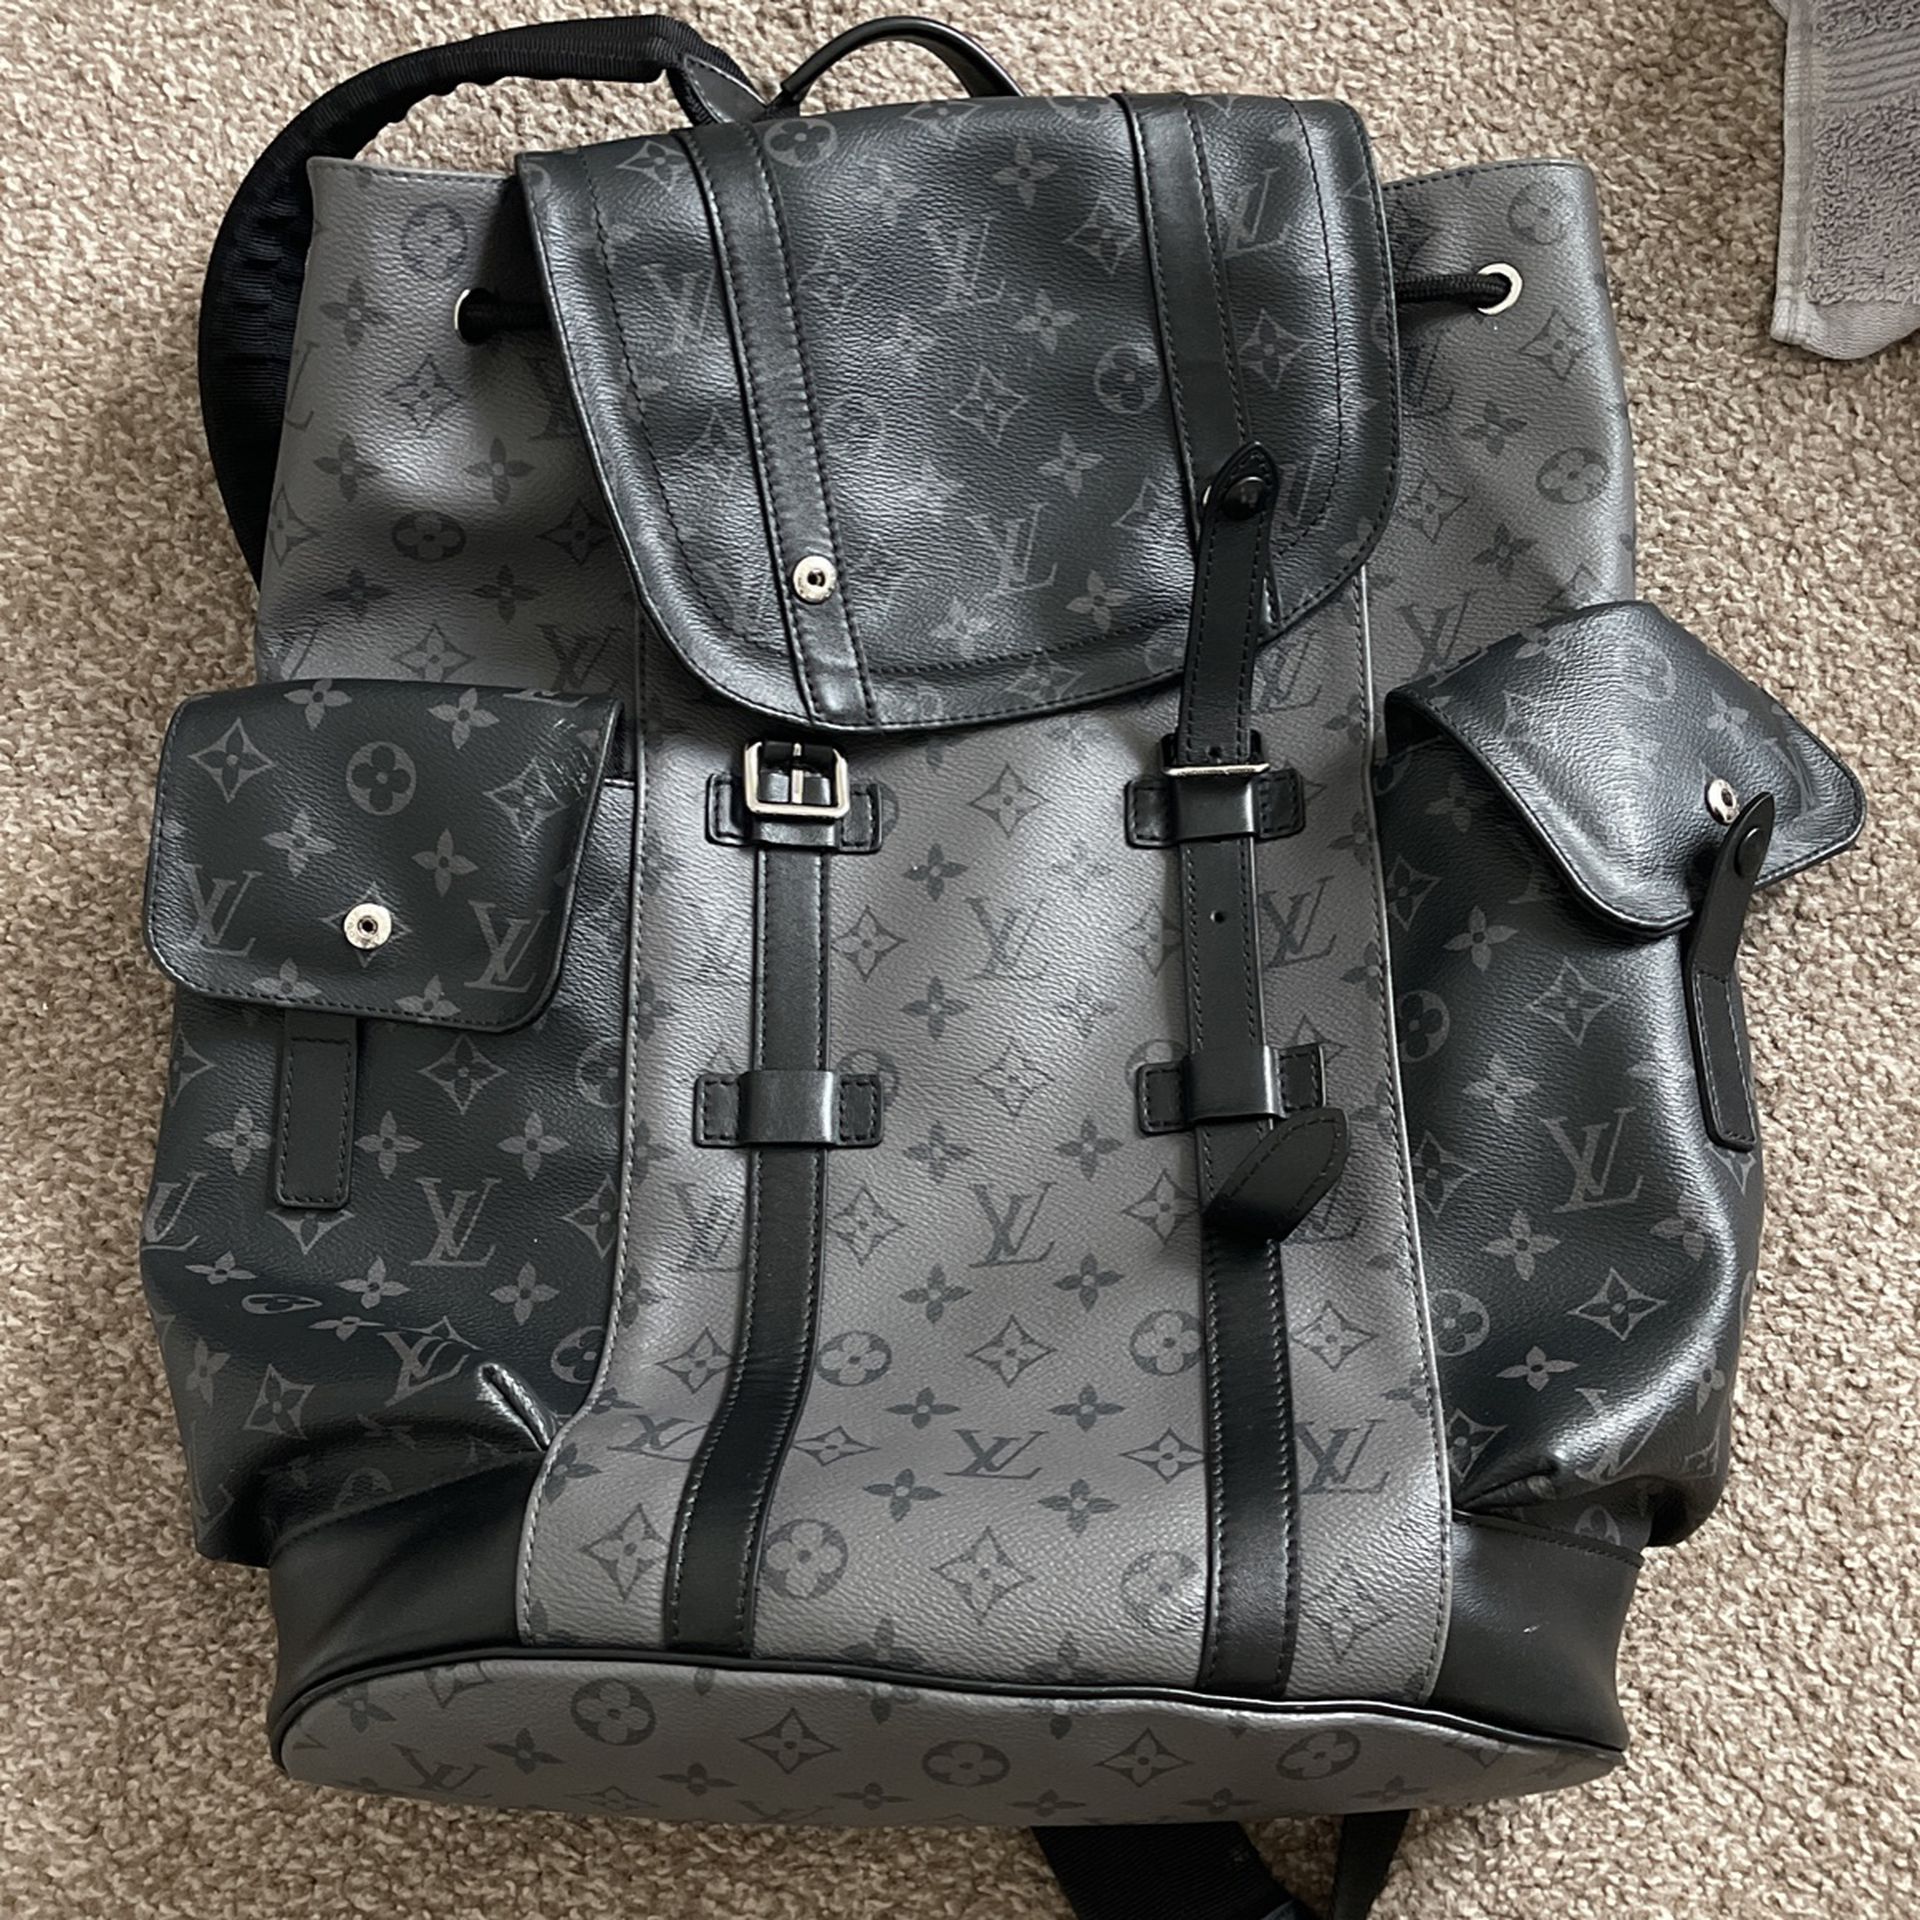 Louis Vuitton Book Bag for Sale in Aloma, FL - OfferUp